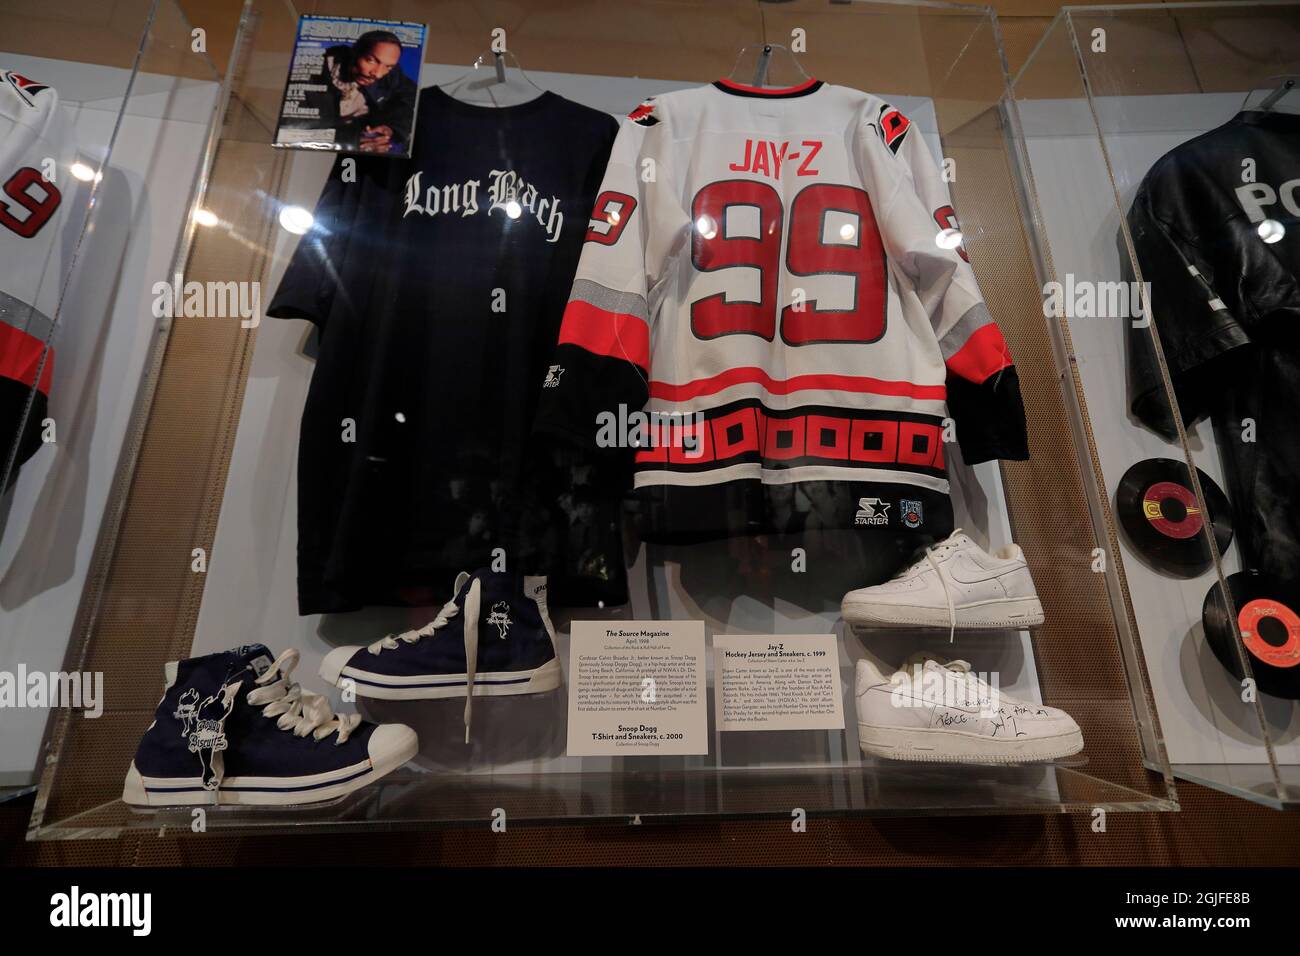 Hip-Hop artists Snoop Dogg and Jay-Z's T-shirt, hockey jersey and sneakers  display in Rock and Roll Hall of Fame.Cleveland.Ohio.USA Stock Photo - Alamy